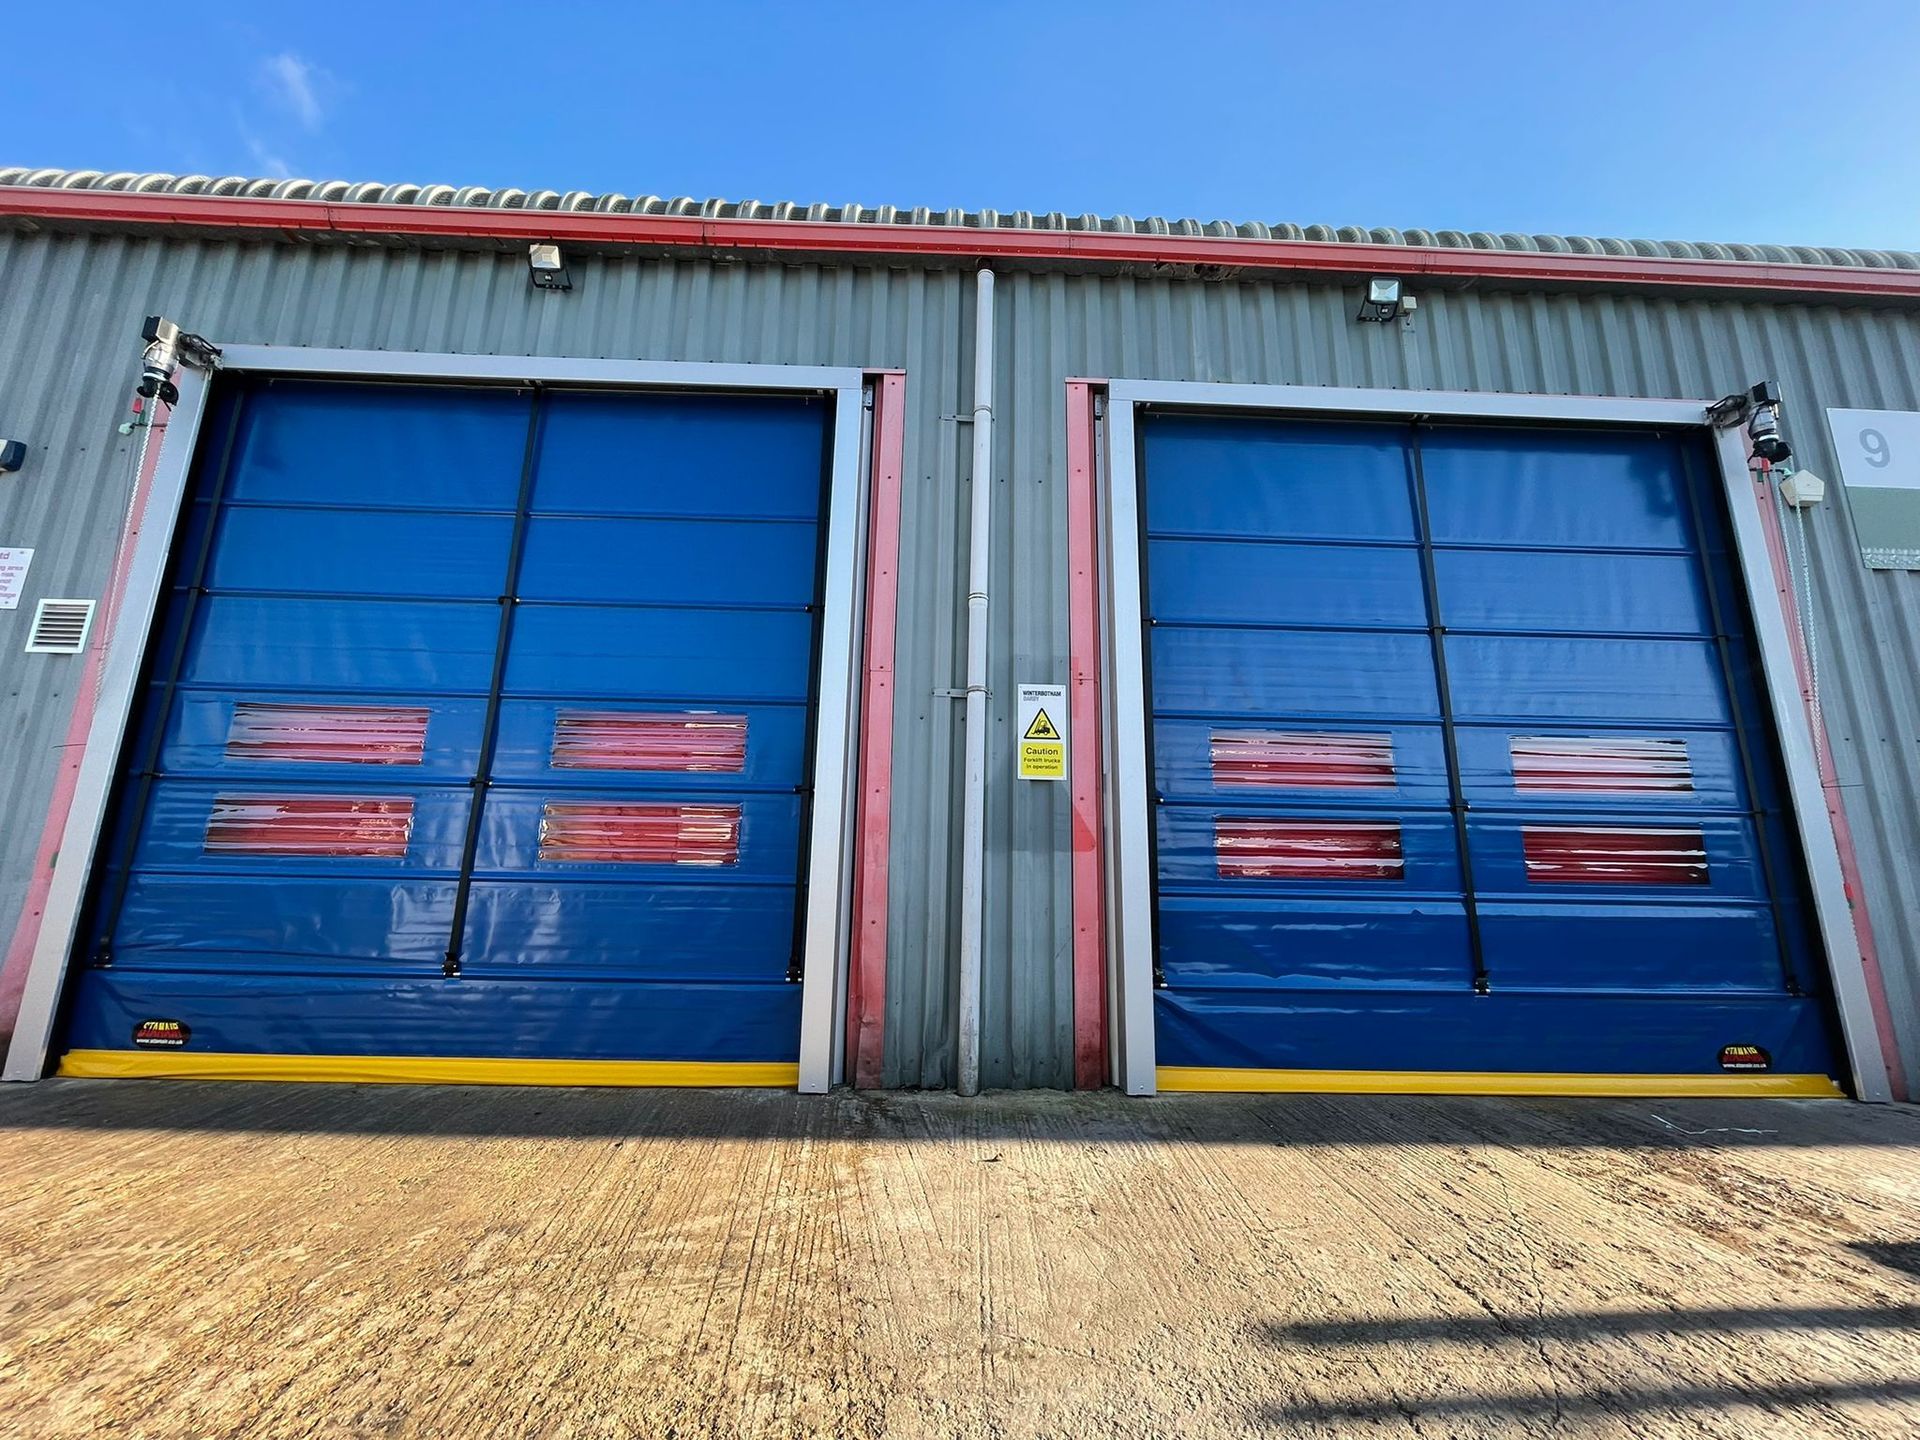 Pair of external High Speed/Rapid Action Doors at a food factory. Motor operated and including wind bars